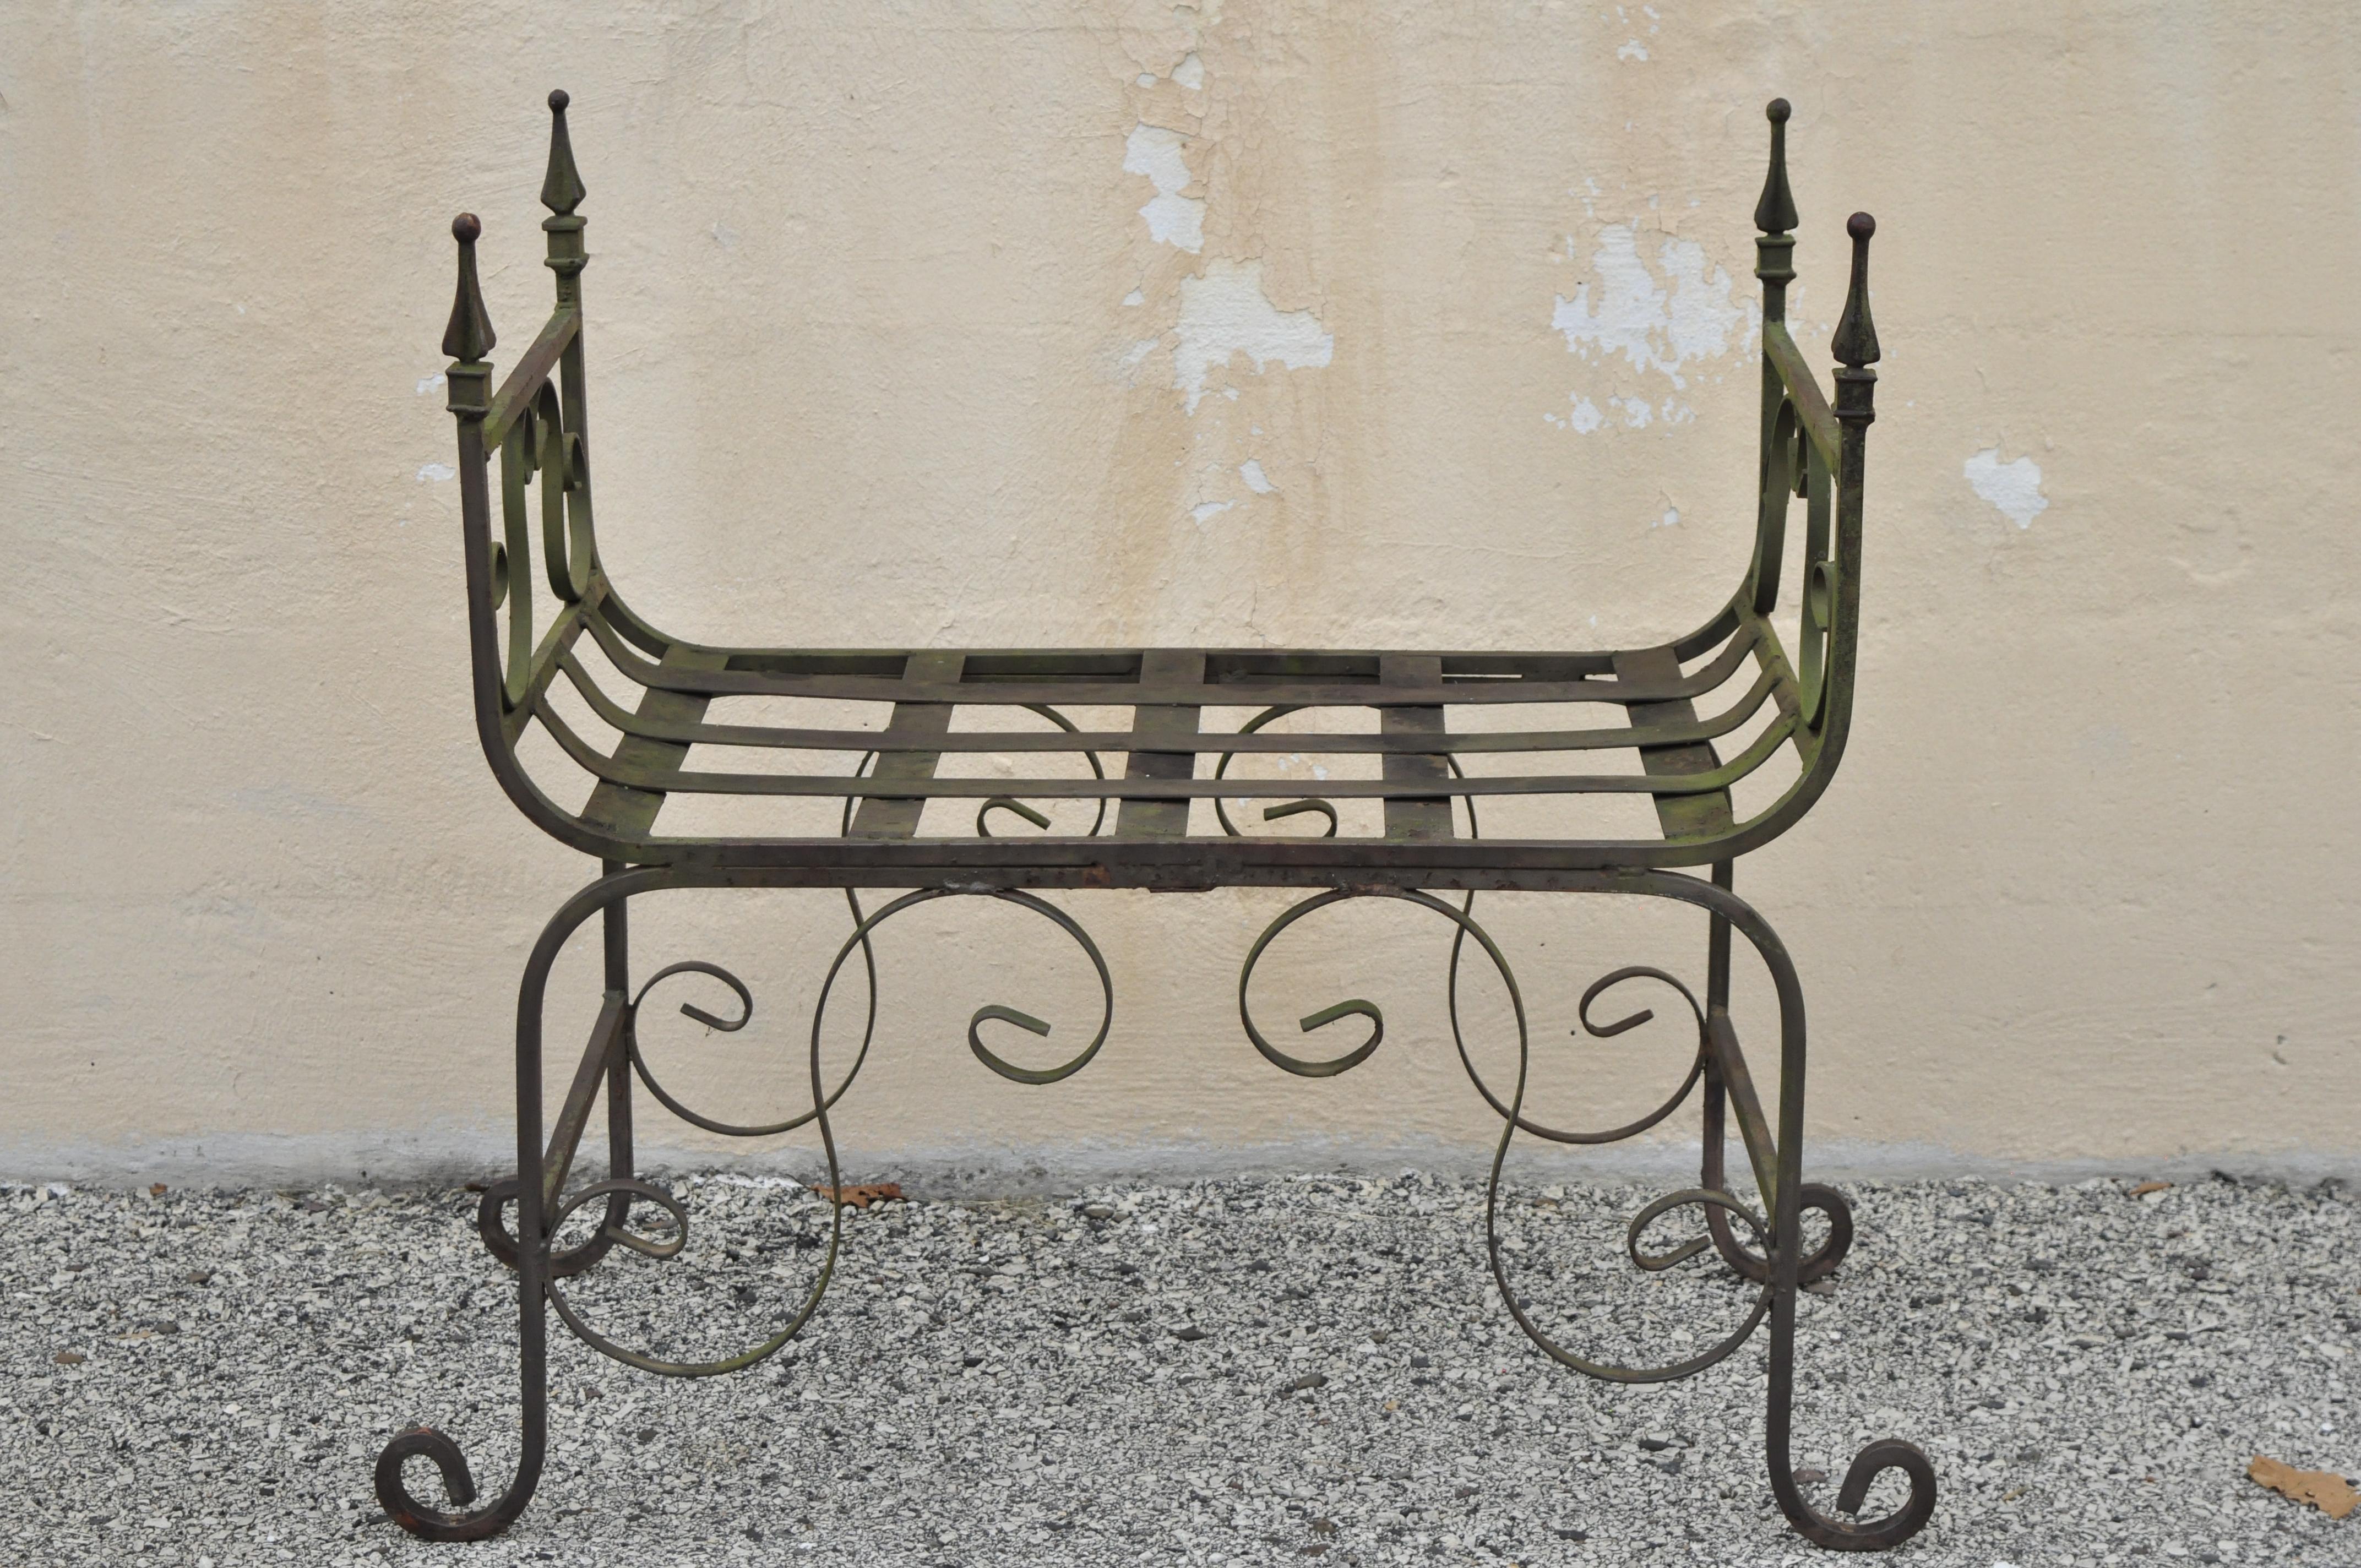 Vintage Gothic wrought iron Curule scrollwork distressed green bench with finials. Item features pointed finials, scrolling frame, lattice seat, wrought iron construction, great style and form, circa mid to late 20th century. Measurements: 30.5